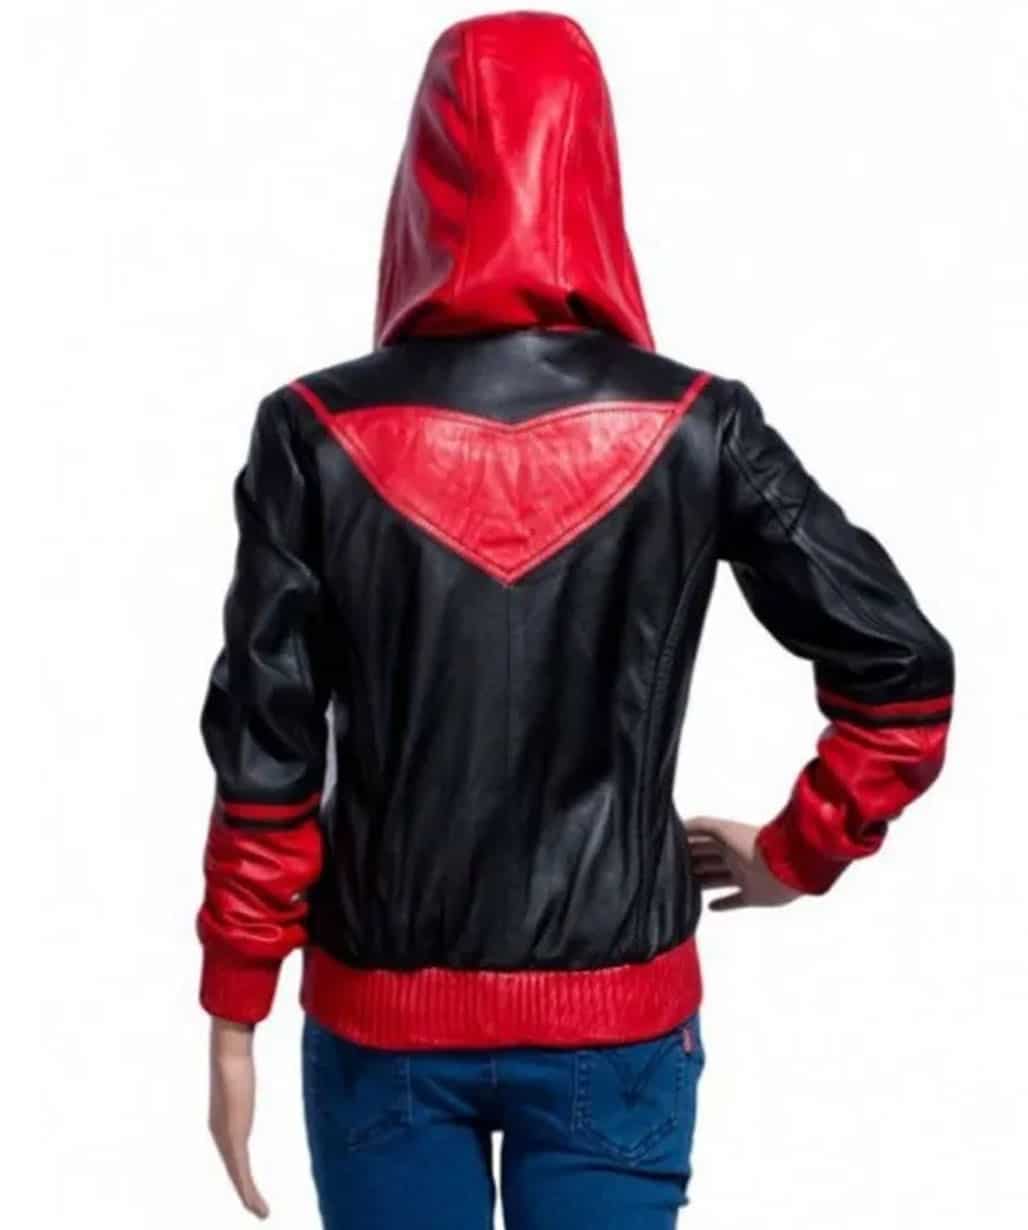 batwoman-ruby-rose-hooded-jacket-costume-For-Sale